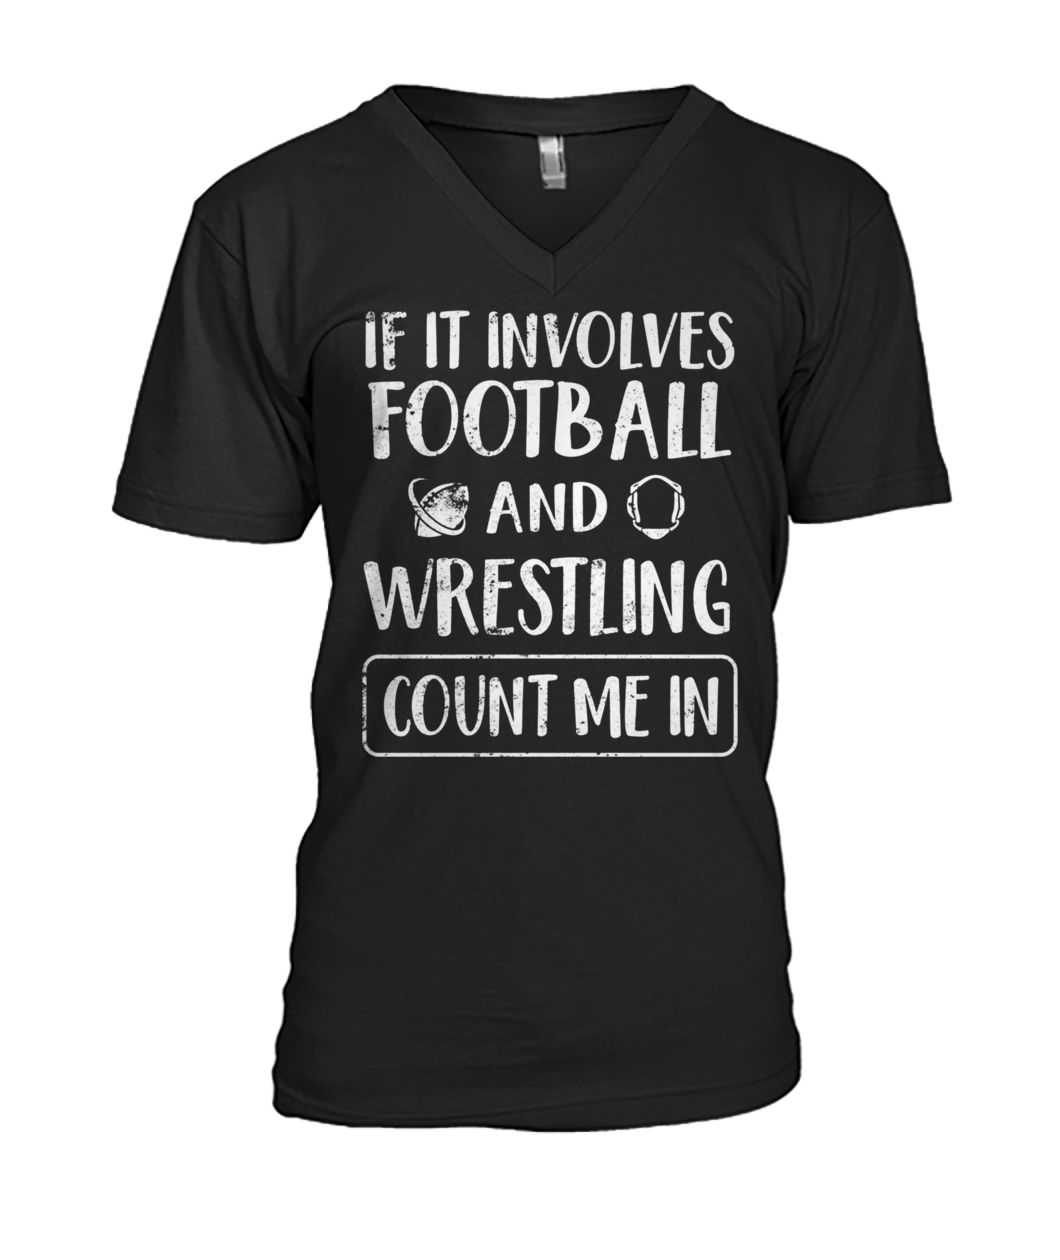 If it involves football and wrestling count me in mens v-neck